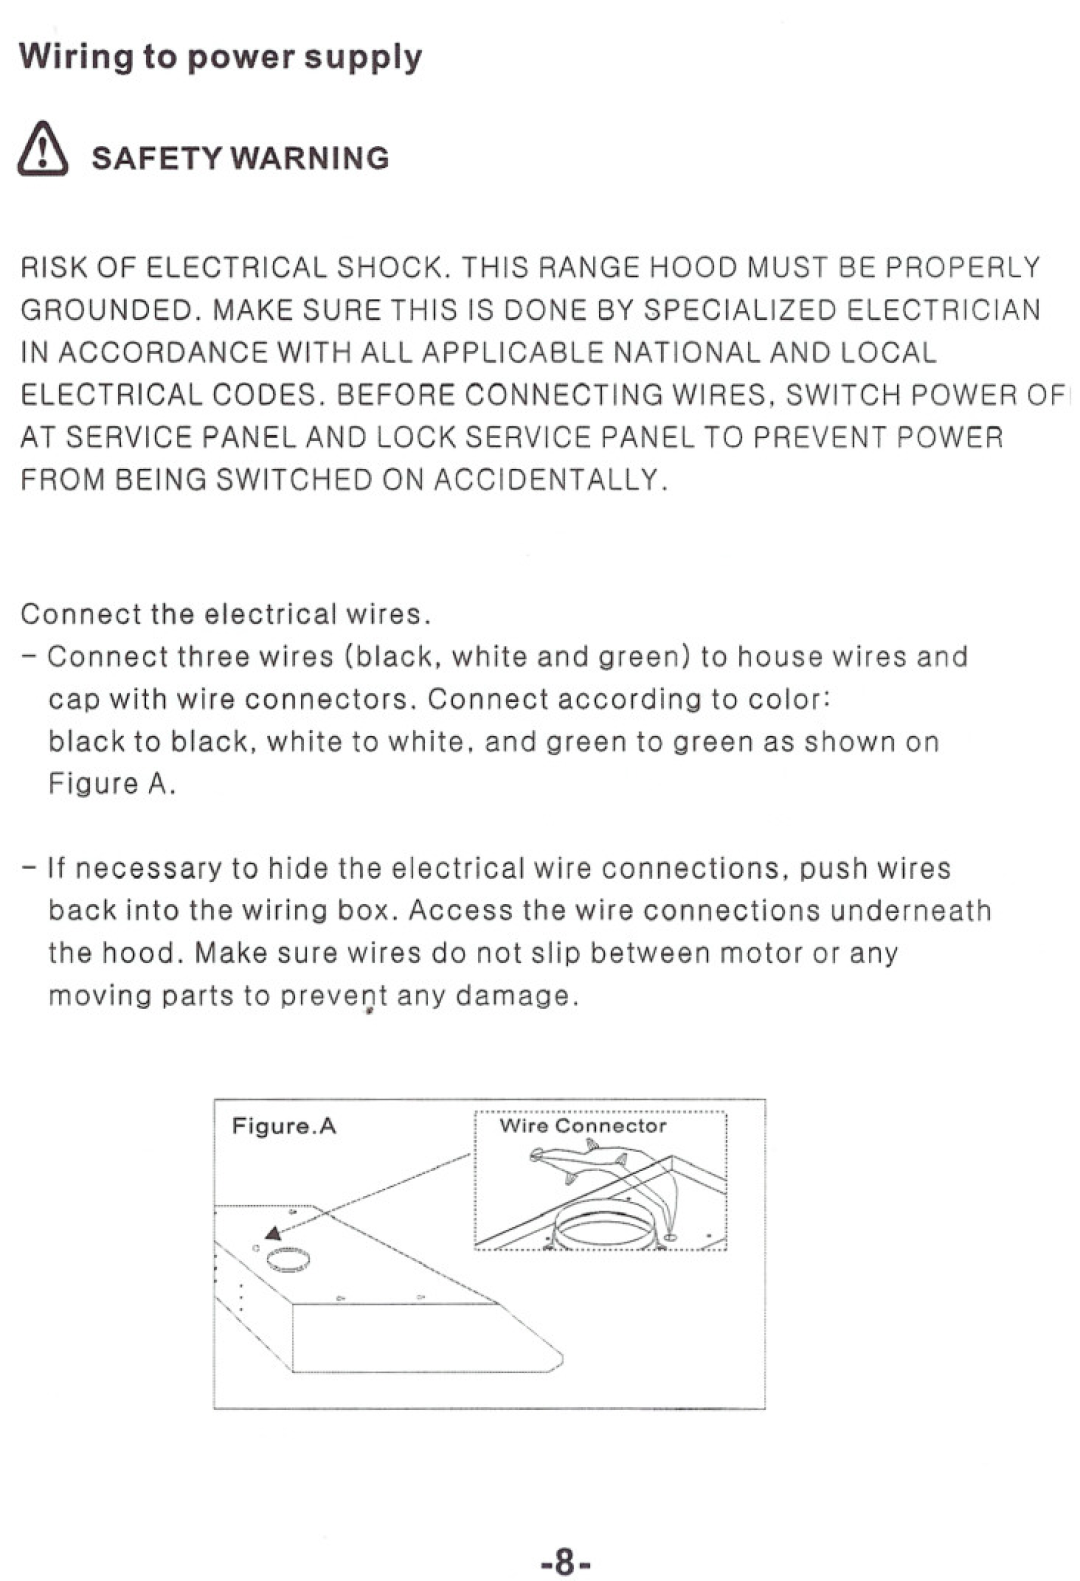 Windster RA.3030/3036, RA.3130/3136 operation manual Wiring to power supply, Safety Warning 